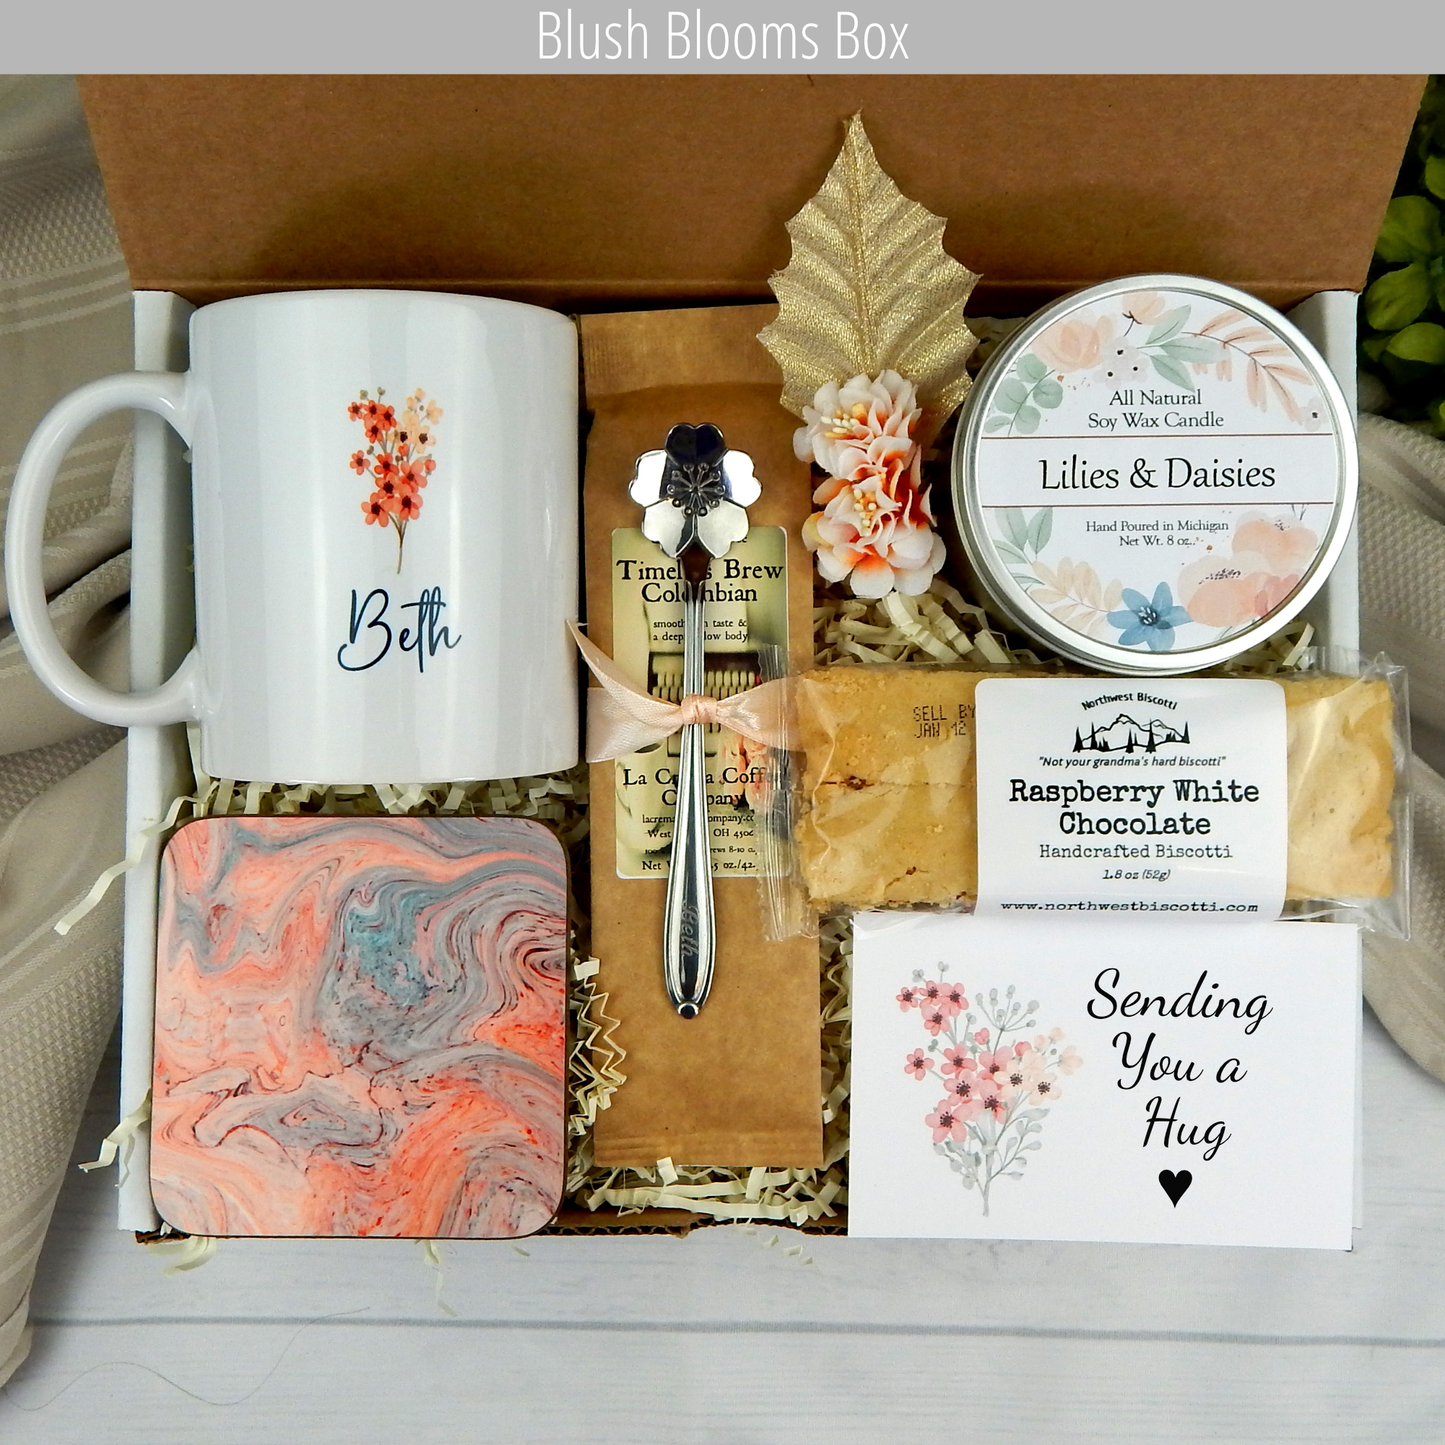 Hug in a basket: Women's encouragement gift basket with personalized mug, coffee, and delicious goodies.